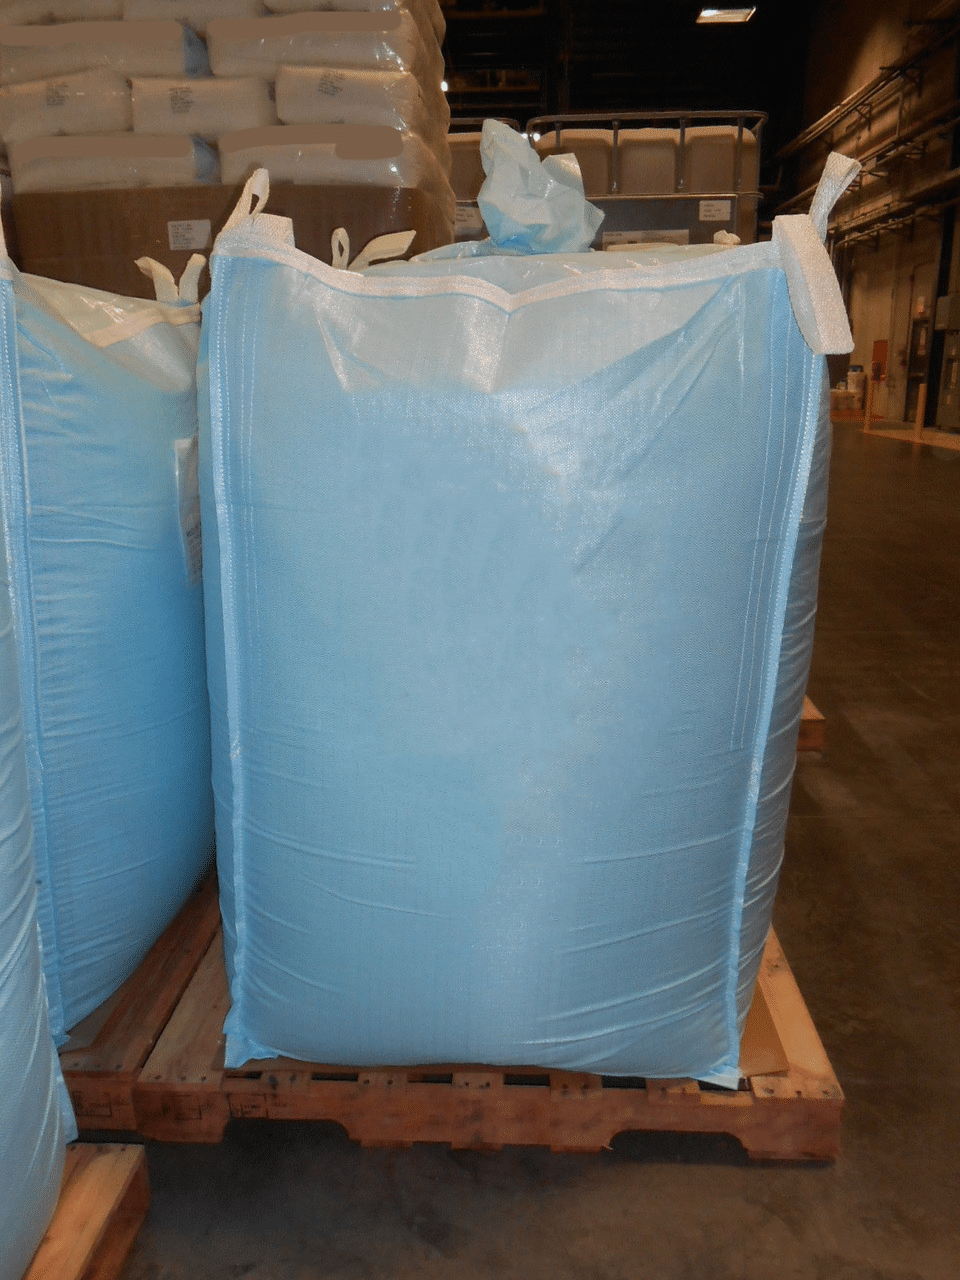 Supersack on a pallet